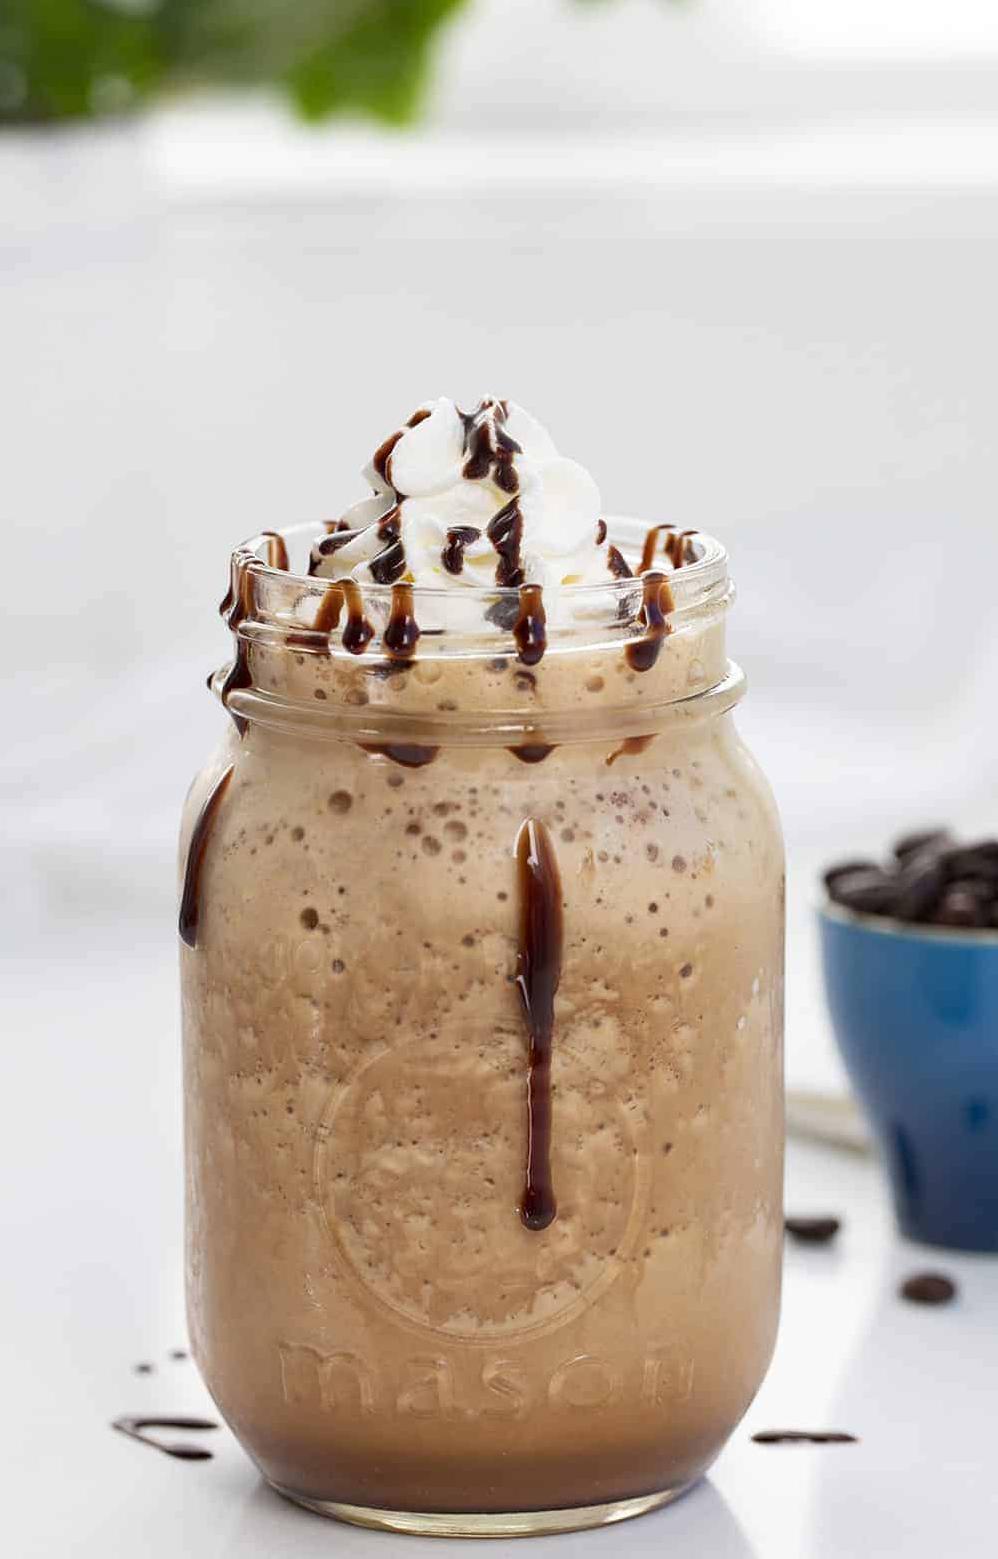  Get ready to indulge in a chocolatey, caffeine-packed treat.